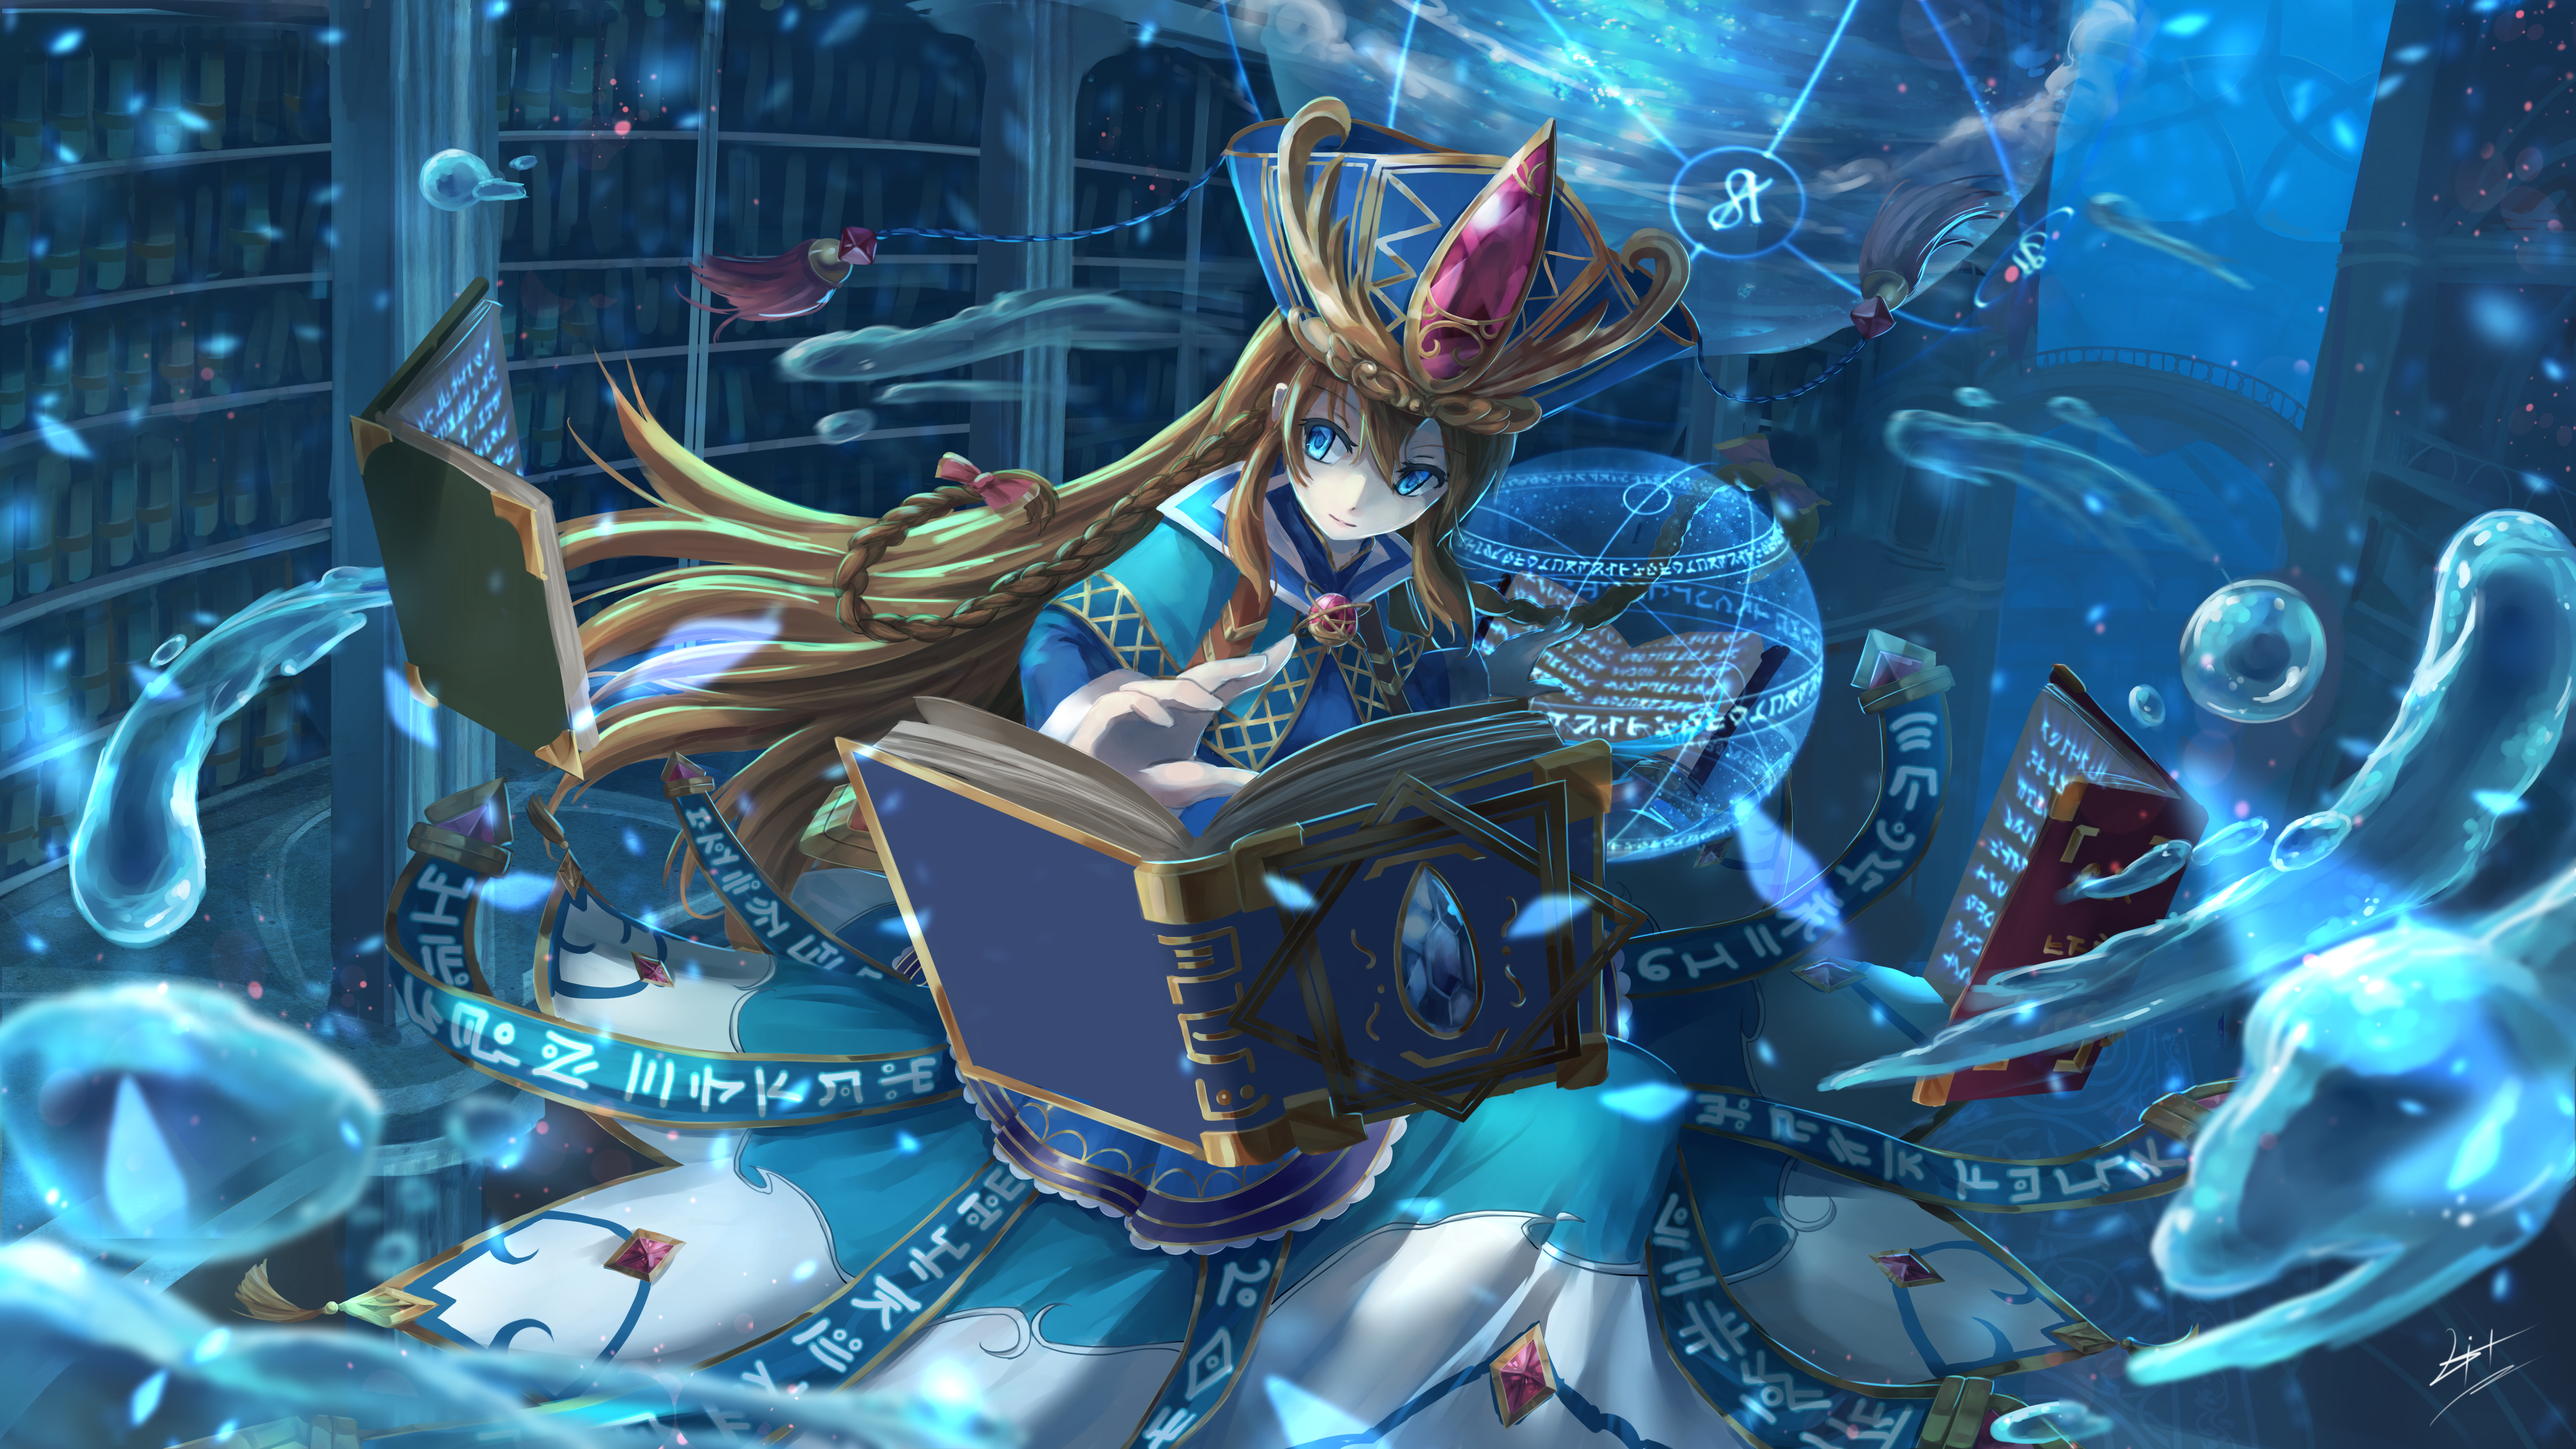 Download 4800x2700 Brave Frontier, Magic, Library, Water Drops, Dress, Anime Style Games Wallpaper